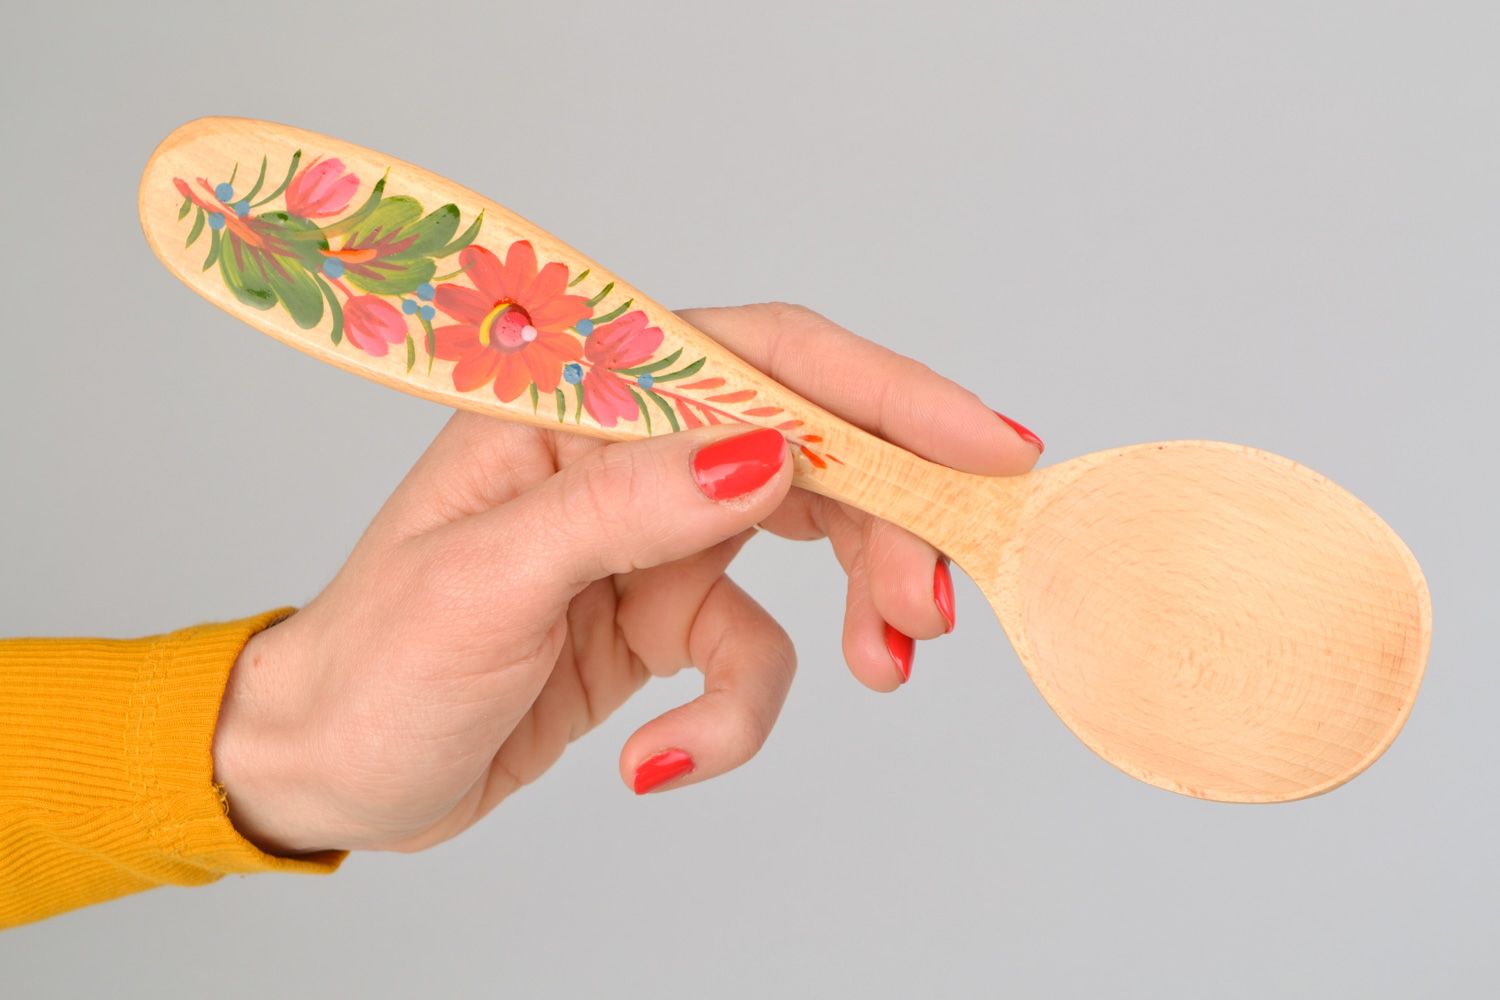 Handmade decorative wood carved spoon painted with oils in Petrikivka style photo 2